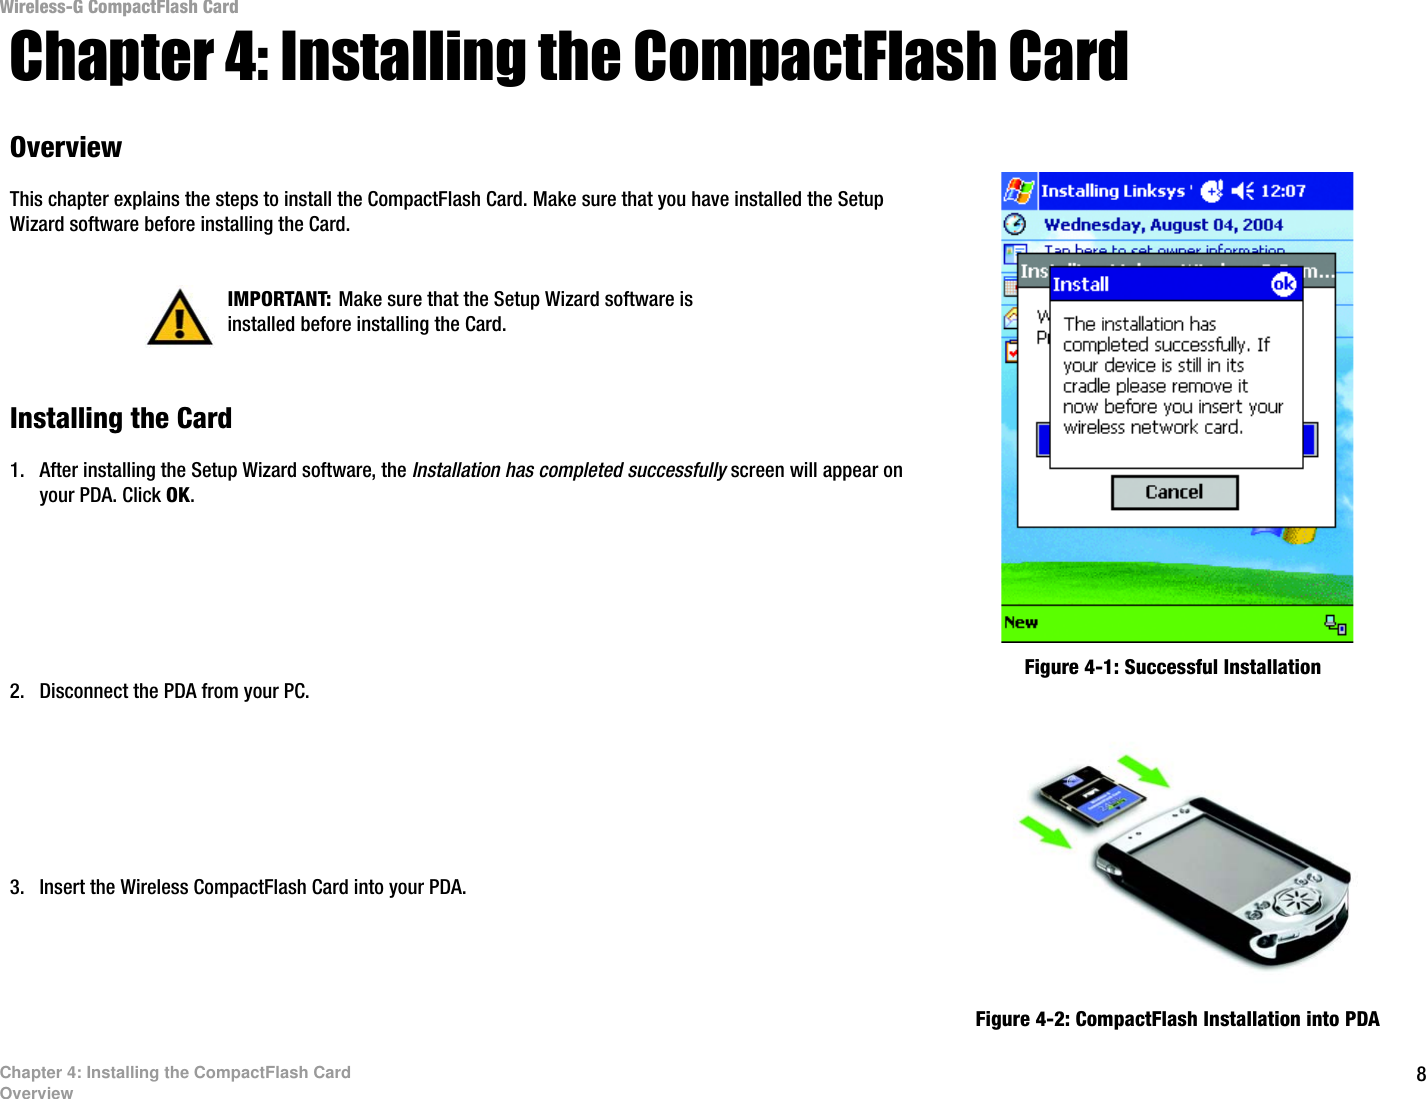 8Chapter 4: Installing the CompactFlash CardOverviewWireless-G CompactFlash CardChapter 4: Installing the CompactFlash CardOverviewThis chapter explains the steps to install the CompactFlash Card. Make sure that you have installed the Setup Wizard software before installing the Card.Installing the Card1. After installing the Setup Wizard software, the Installation has completed successfully screen will appear on your PDA. Click OK.2. Disconnect the PDA from your PC.3. Insert the Wireless CompactFlash Card into your PDA.  Figure 4-1: Successful InstallationIMPORTANT: Make sure that the Setup Wizard software is installed before installing the Card.Figure 4-2: CompactFlash Installation into PDA